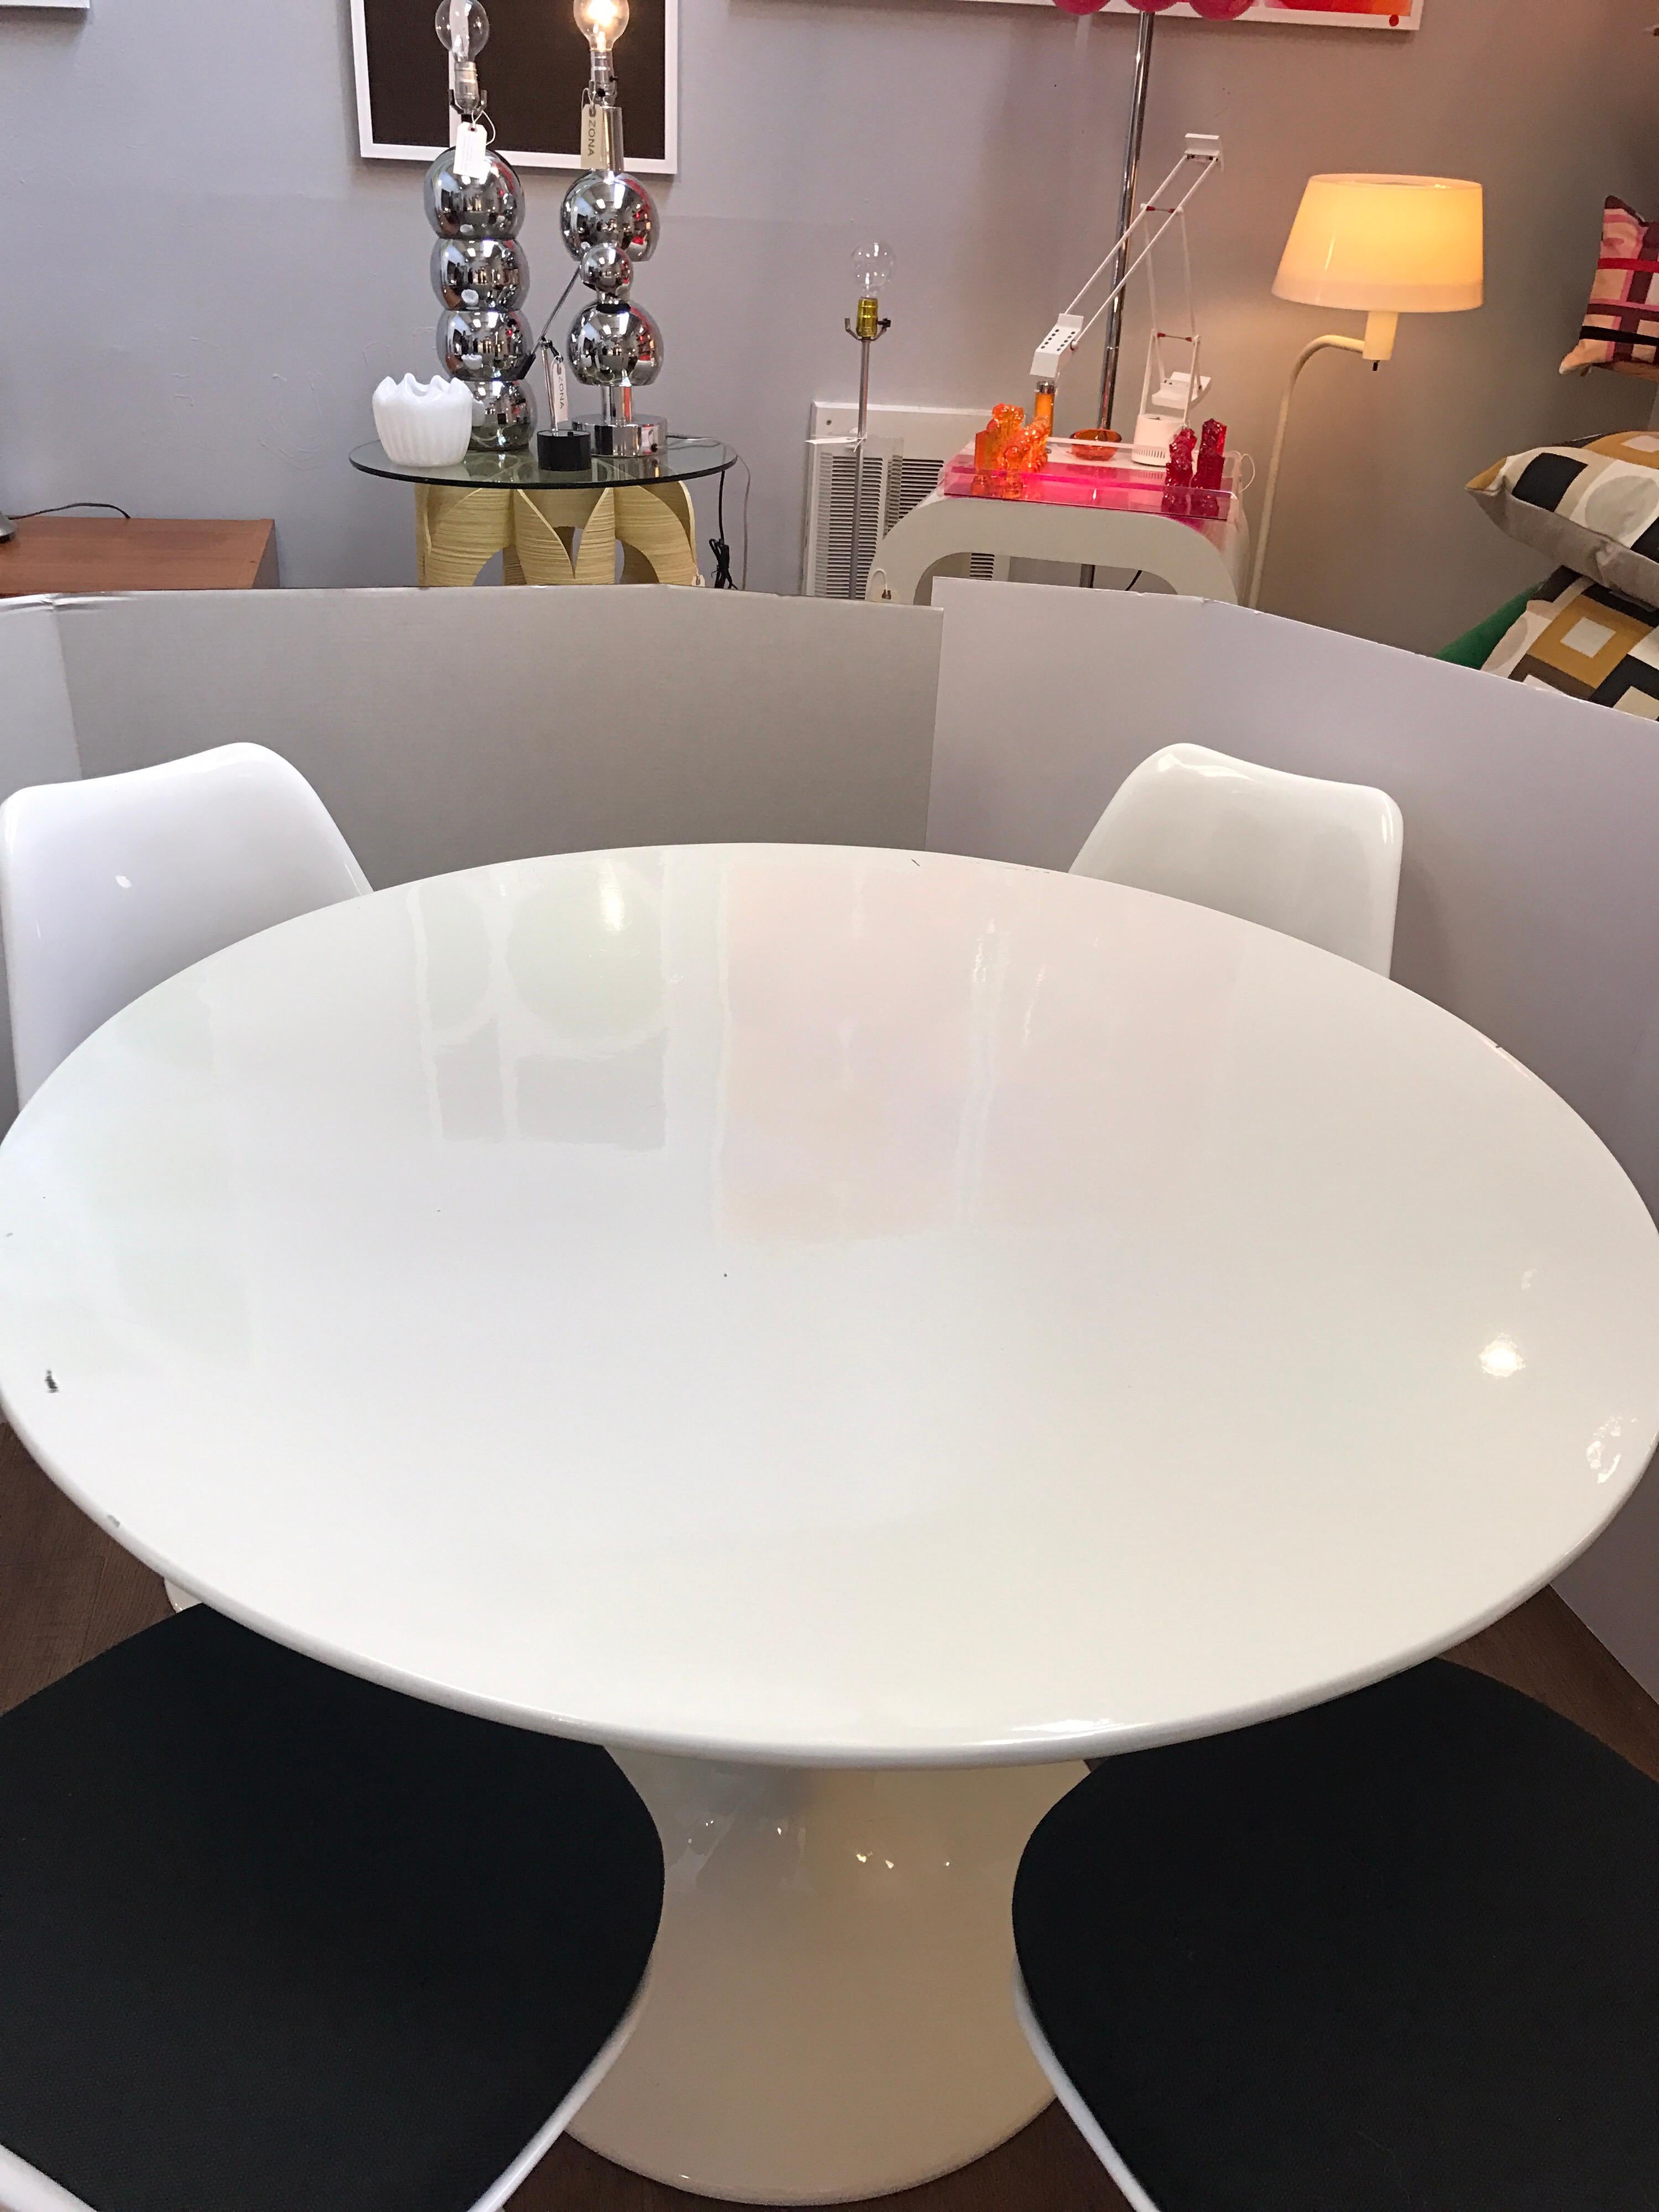 Mid-Century Modern Saarinen style tulip table and four chairs with black wool seats. Table dimensions are below and dimensions of chairs are 31 inches high by 18.5 inches wide by 19.5 inches deep.